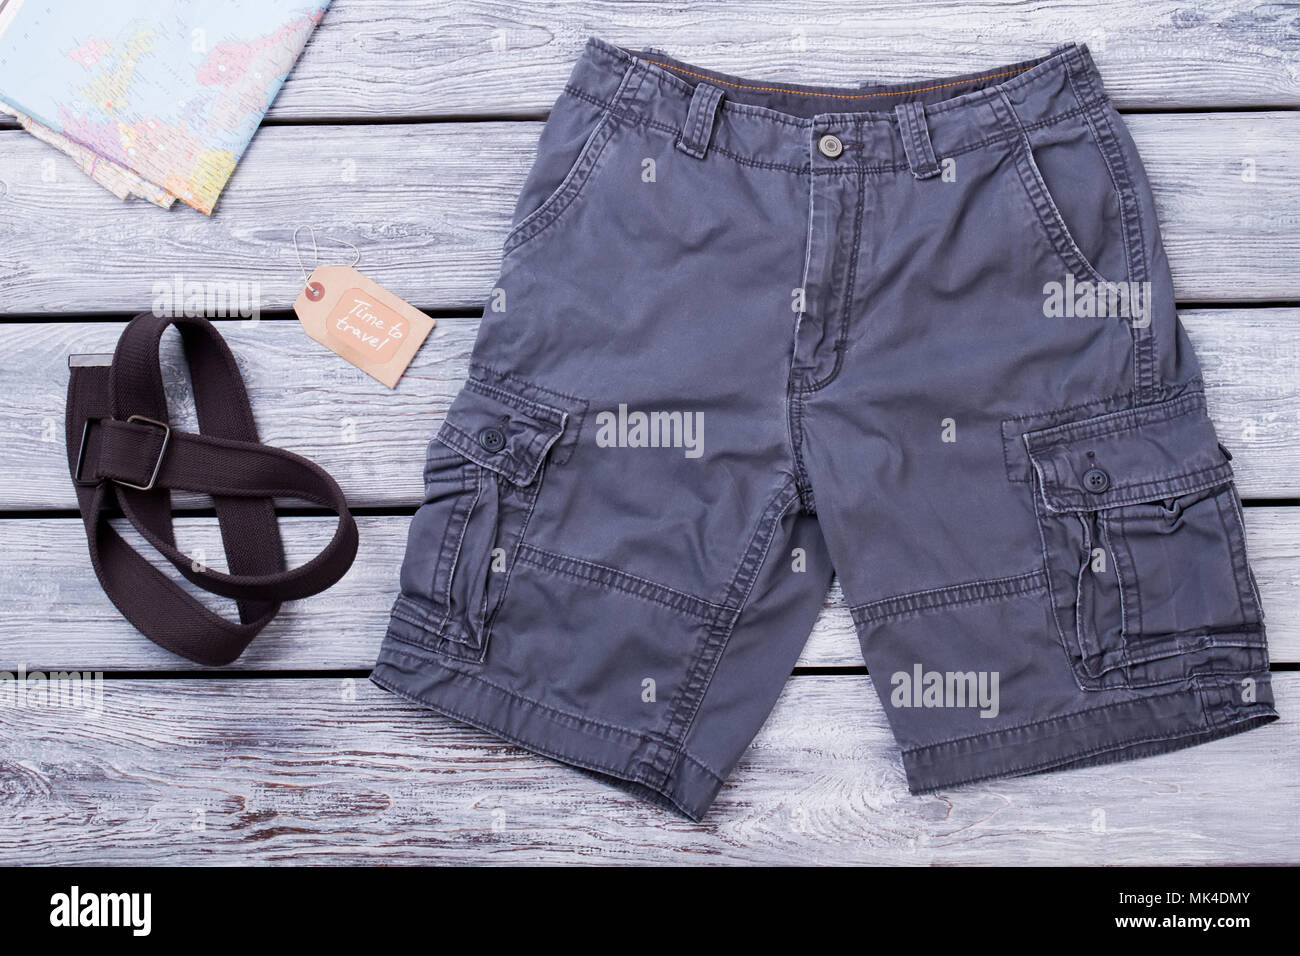 Travel clothes and equipment. Black shorts, map and strap. Wooden desk surface background. Stock Photo